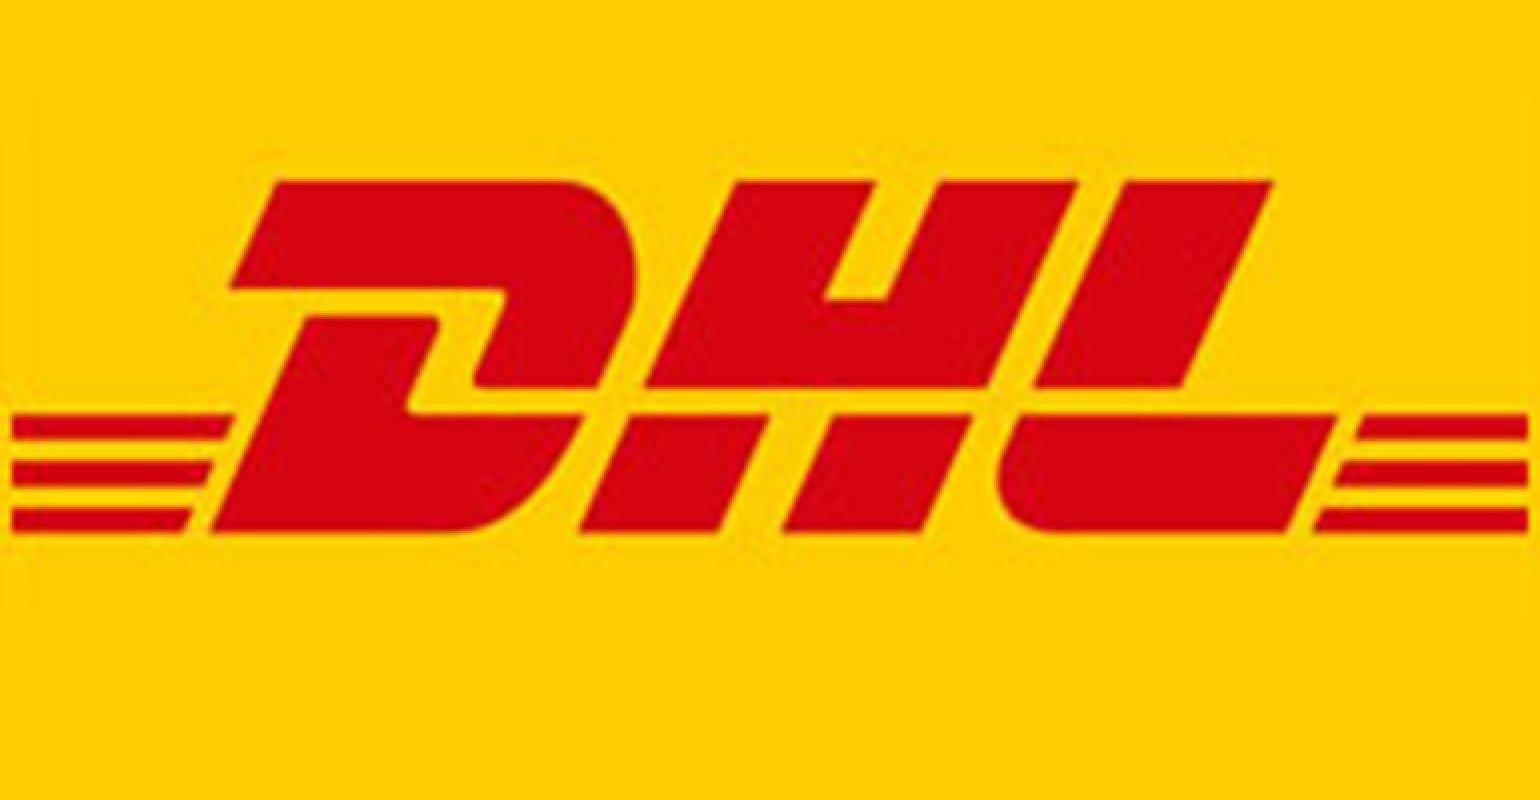 DHL New Logo - Supply Chain Visibility Platform | Material Handling and Logistics ...